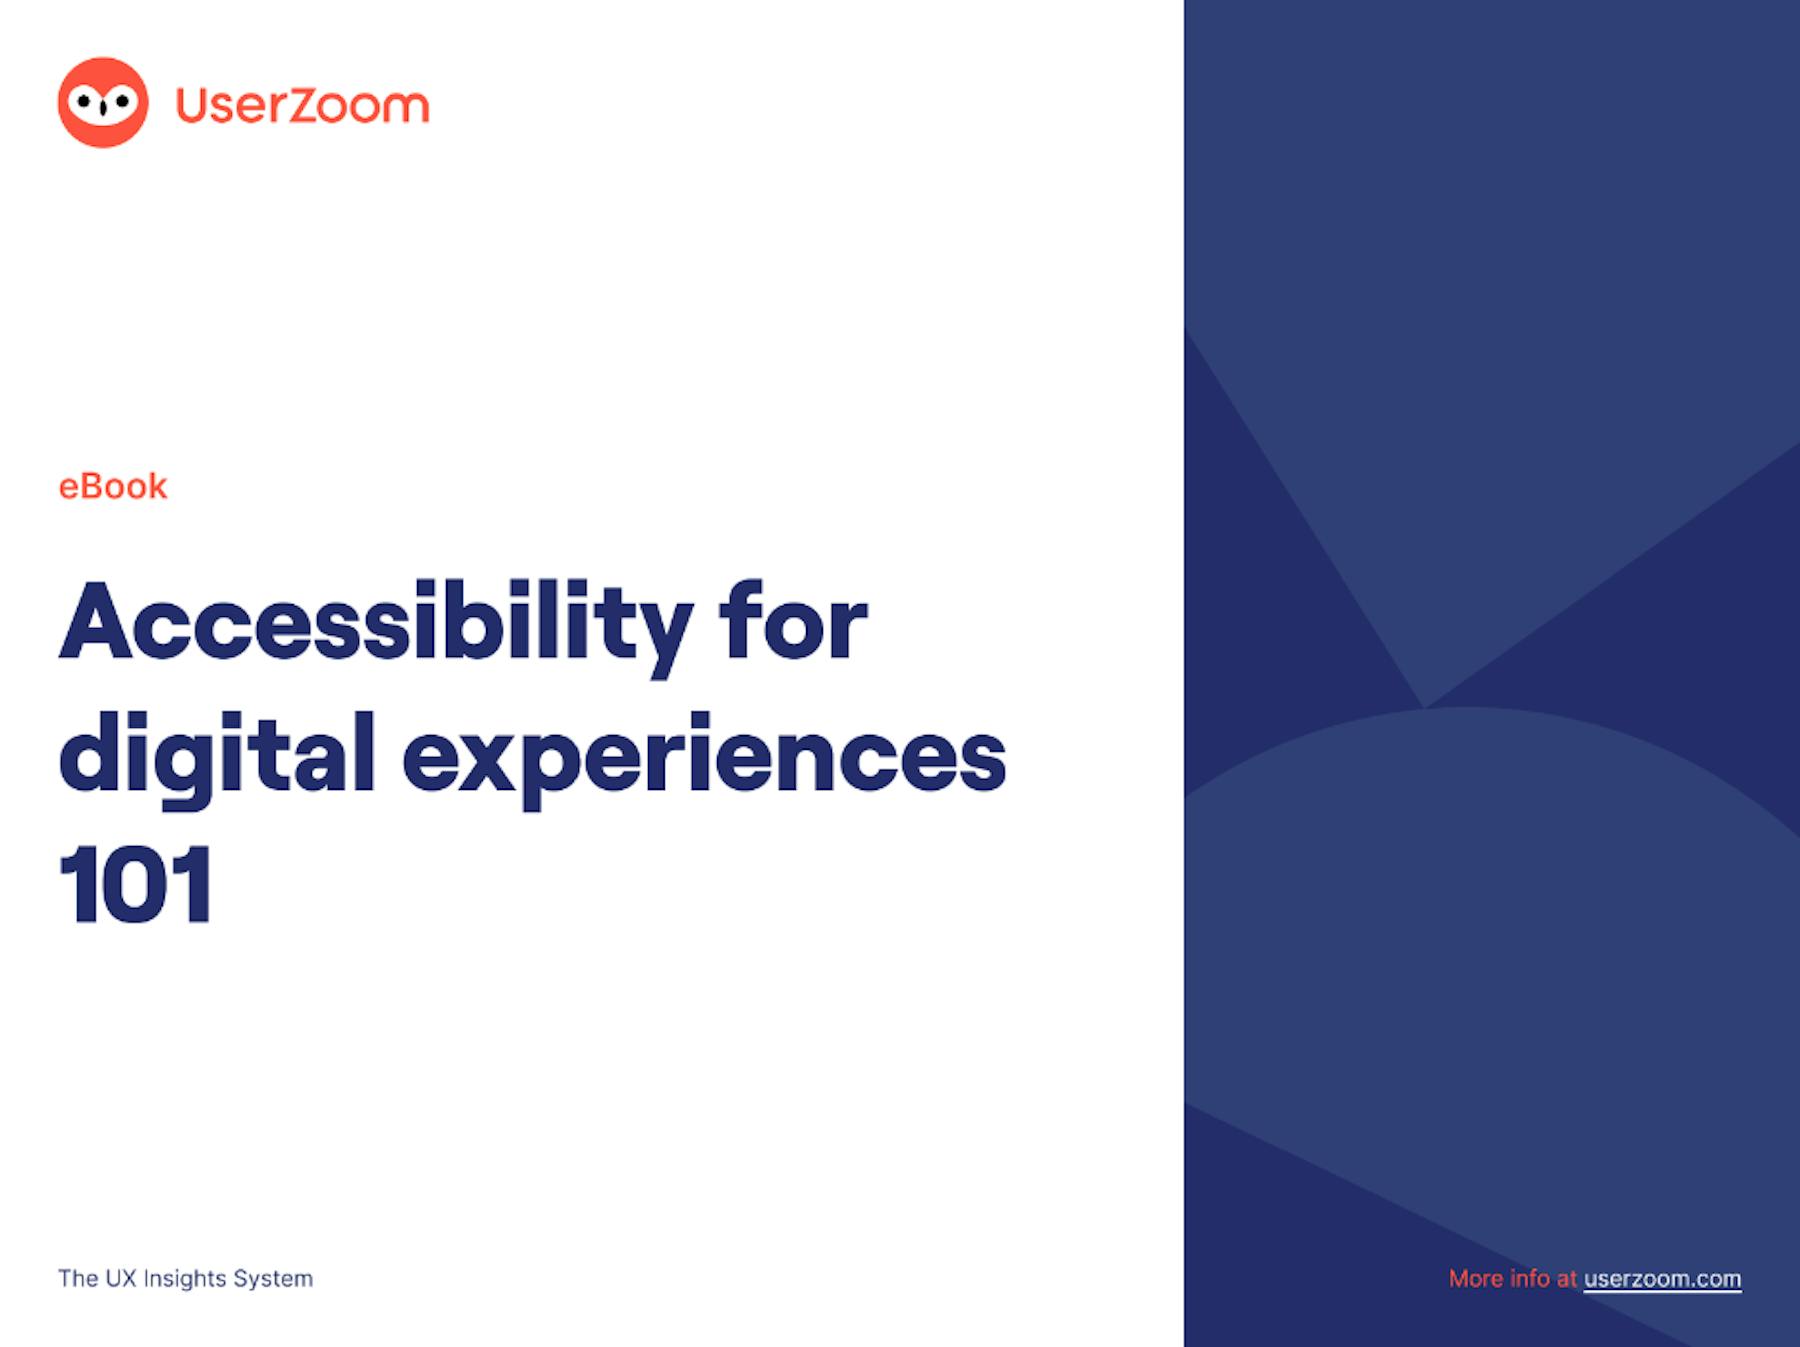 UserZoom Accessibility for Digital Experiences 101 ebook